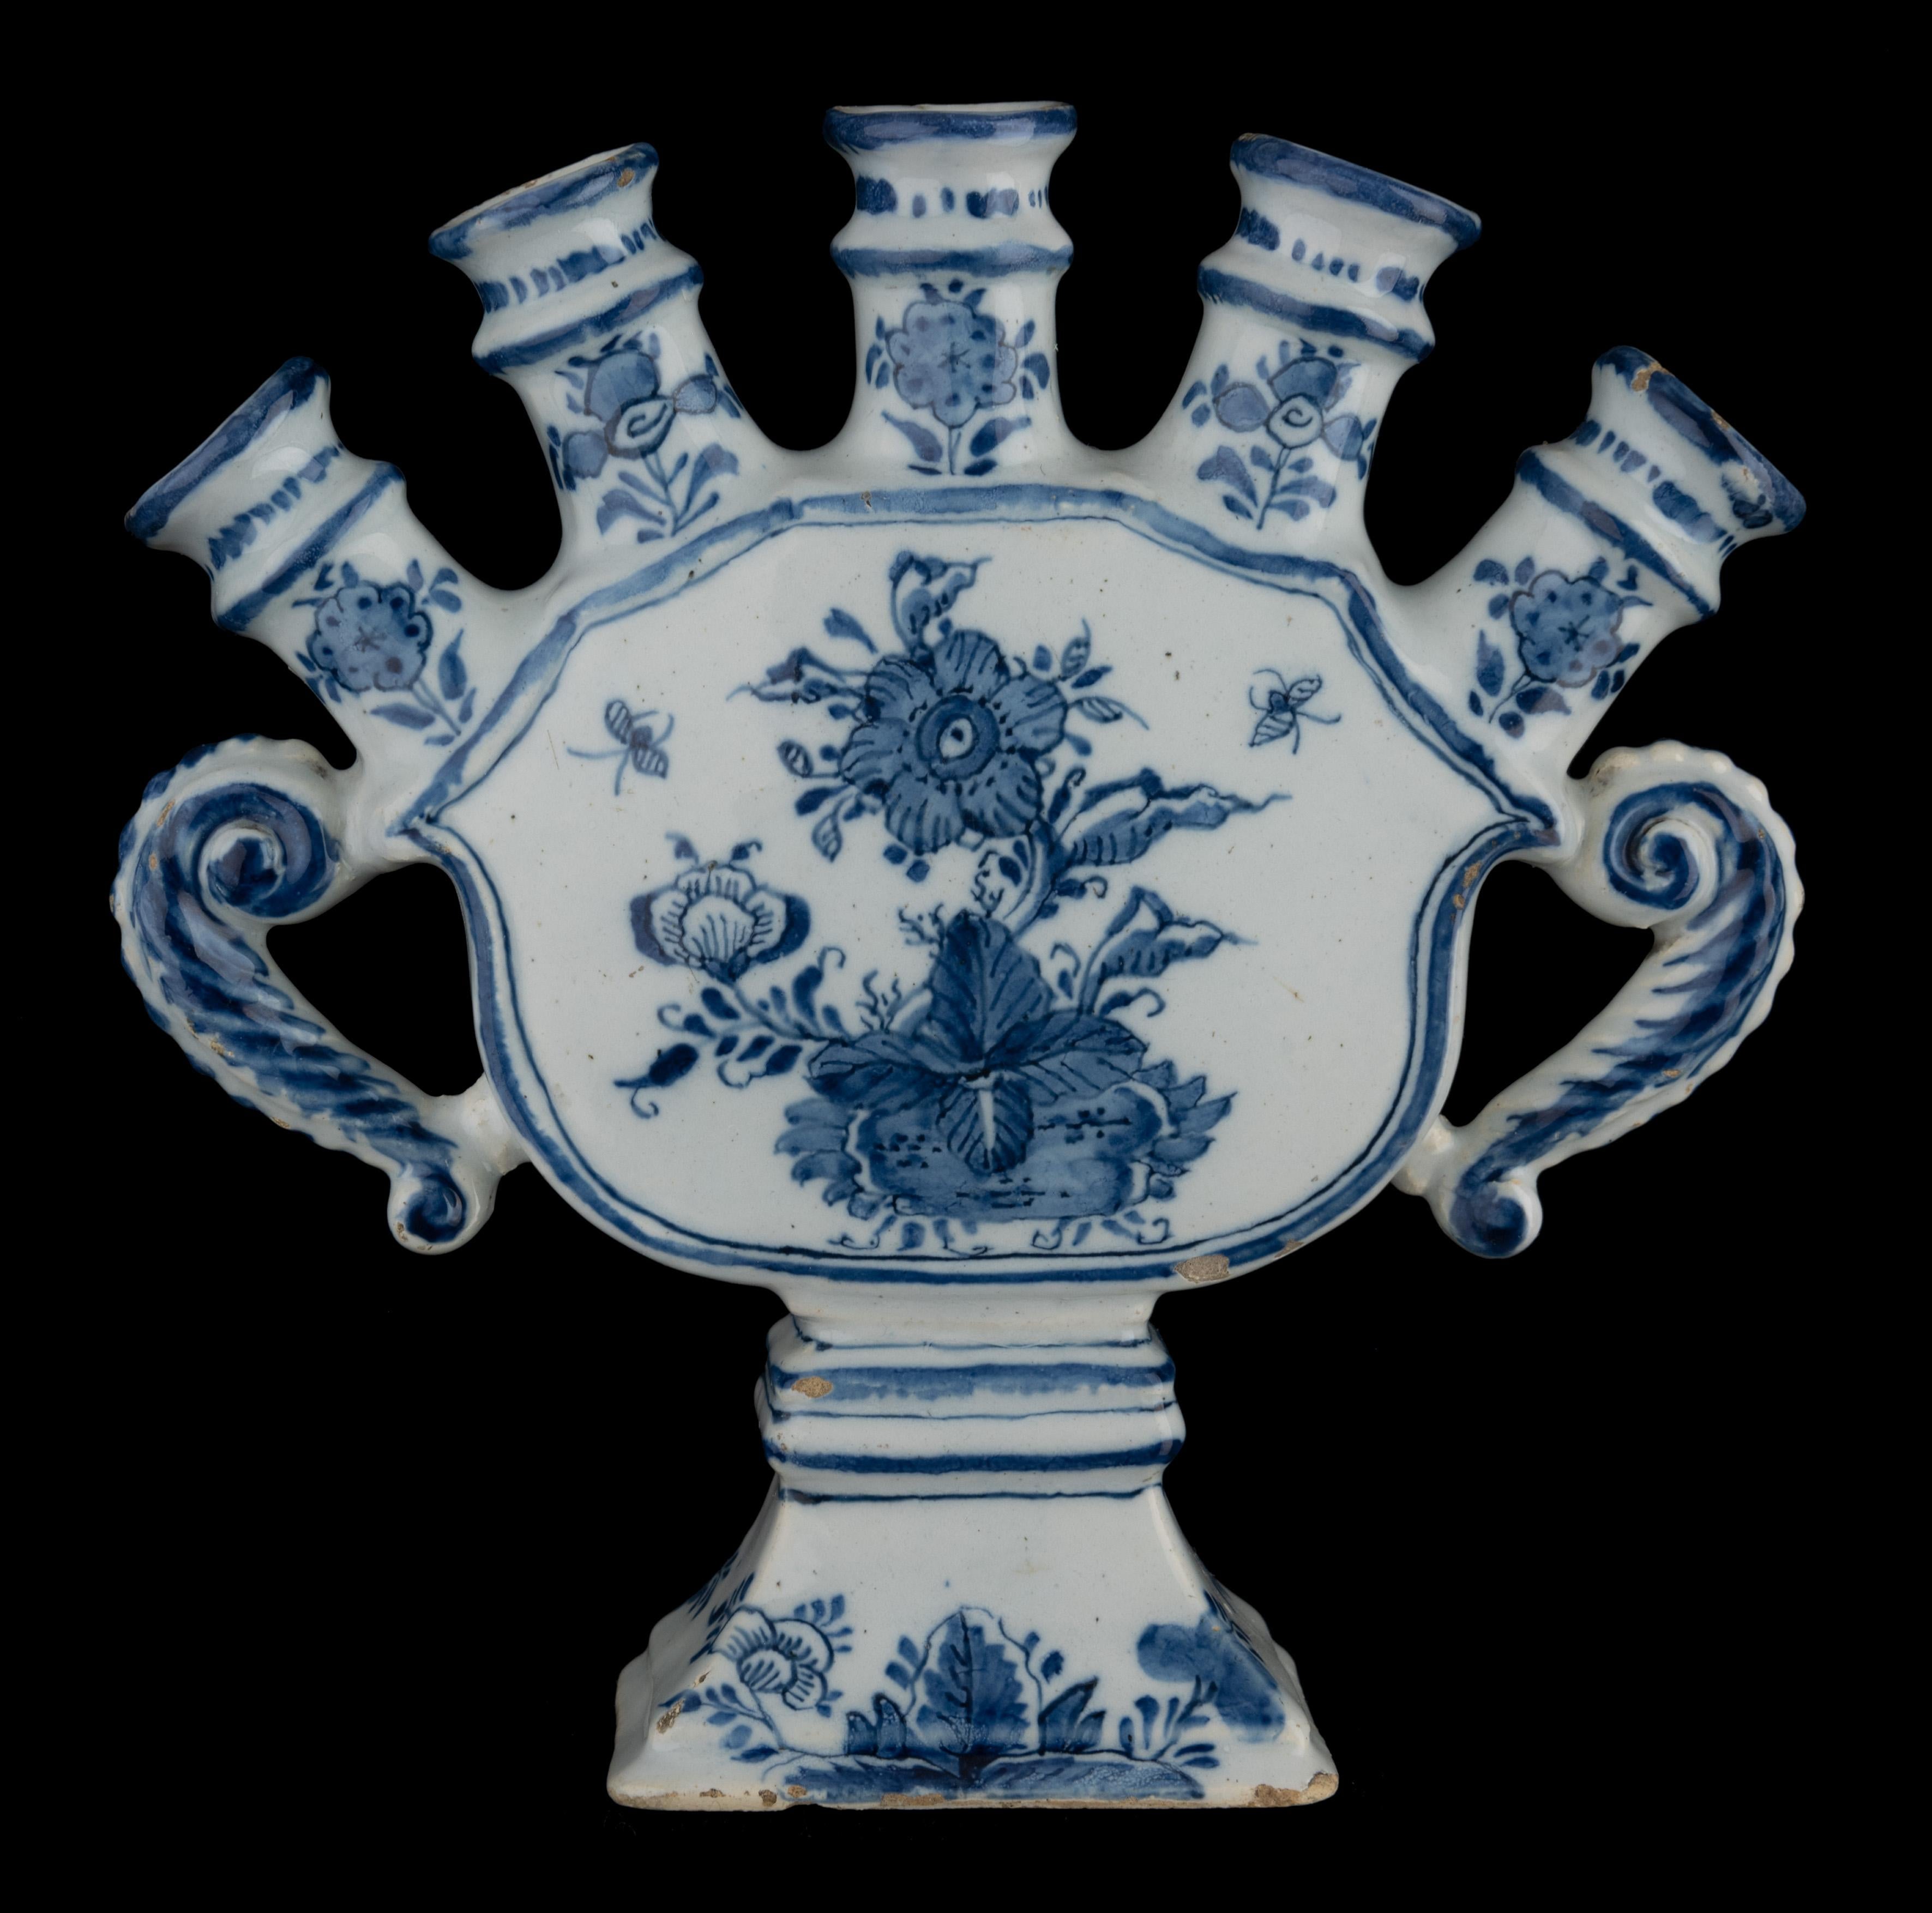 Delft Blue and white flower vase with spouts Delft, 1720-1730 

The flower vase of the quintel model is bowl-shaped and crowned by five short, thickened, necks forming a fan-shaped row of spouts. The flower vase stands on a waisted, spreading foot